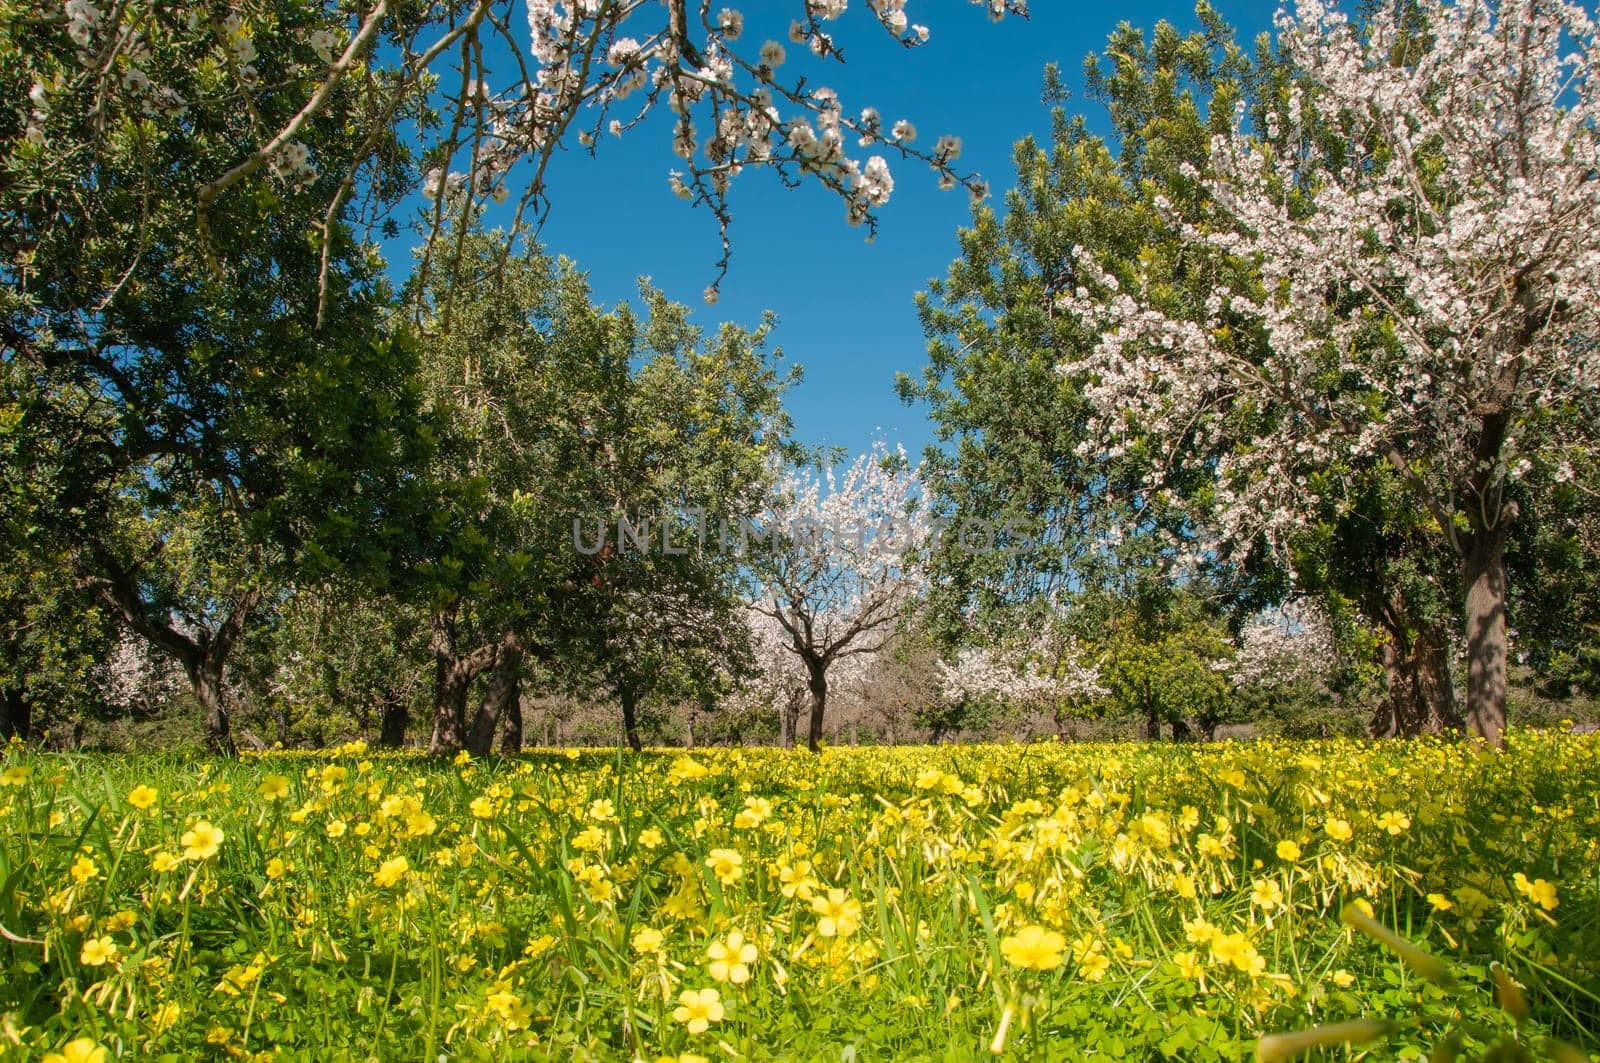 Springtime Splendor in a Blossoming Orchard with Golden Wildflowers by Juanjo39